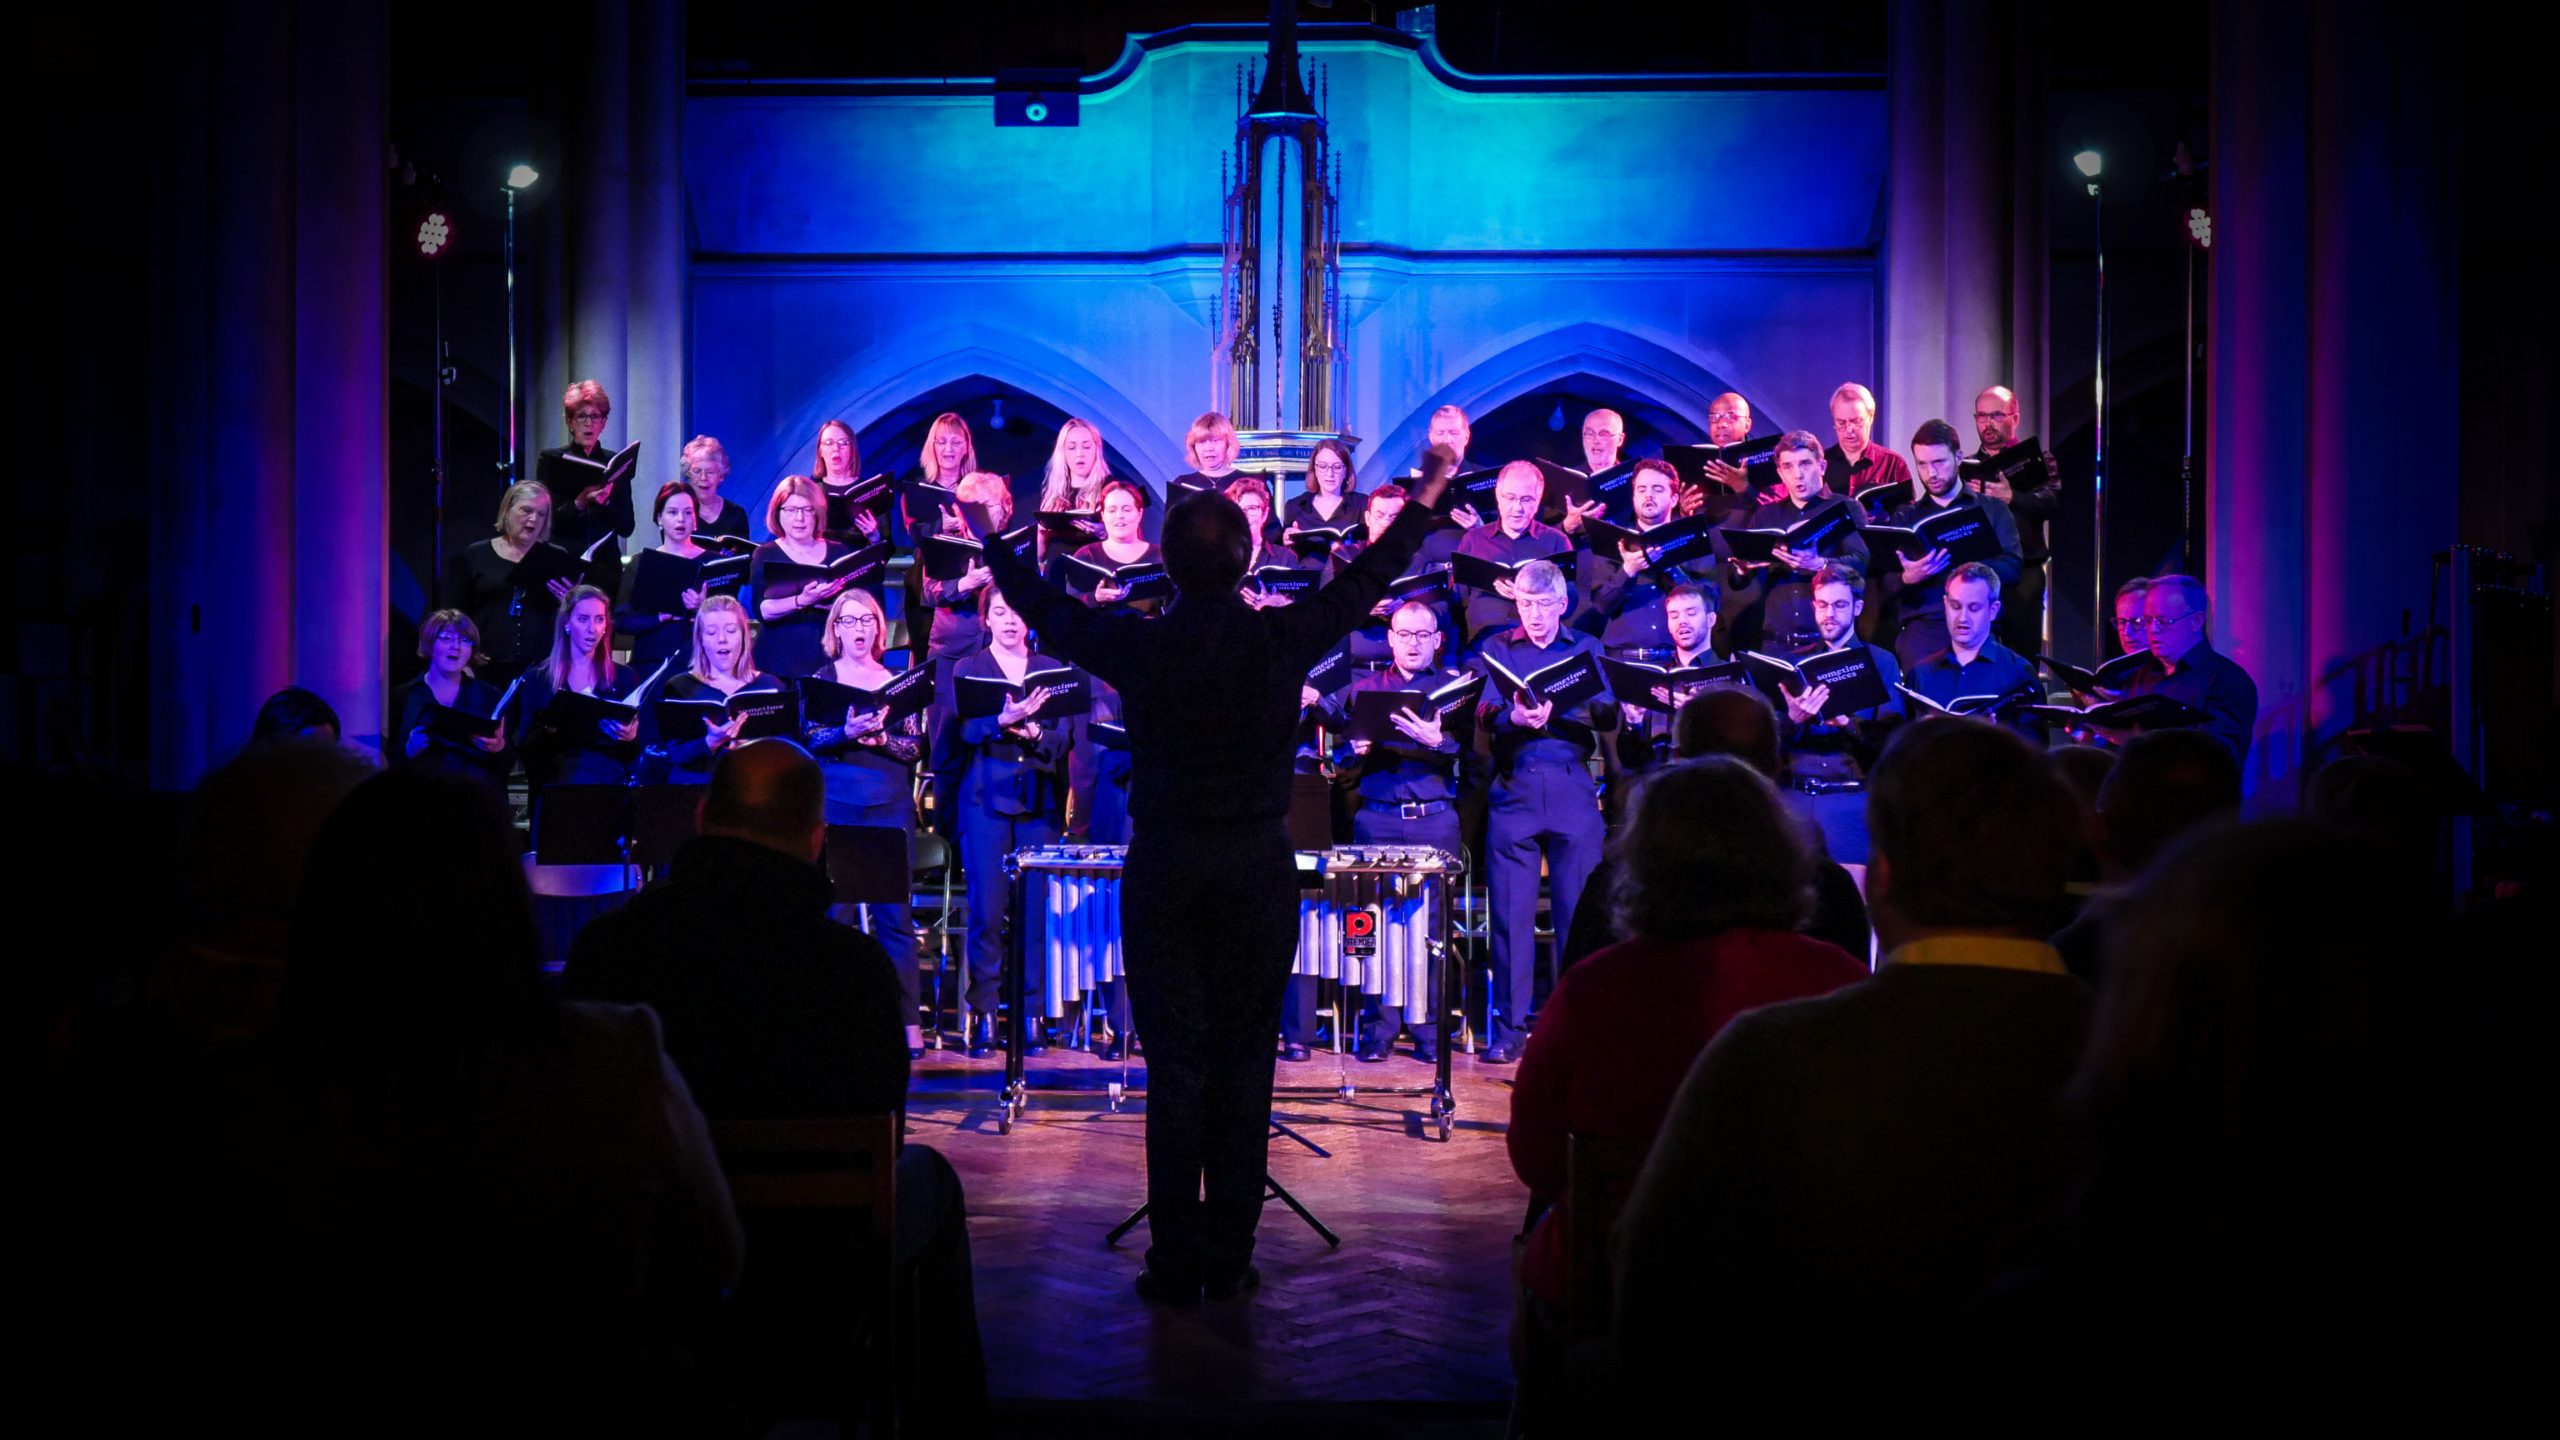 Visual aid: Choir and conductor with blue light in the background at a classical music concert in a church in London